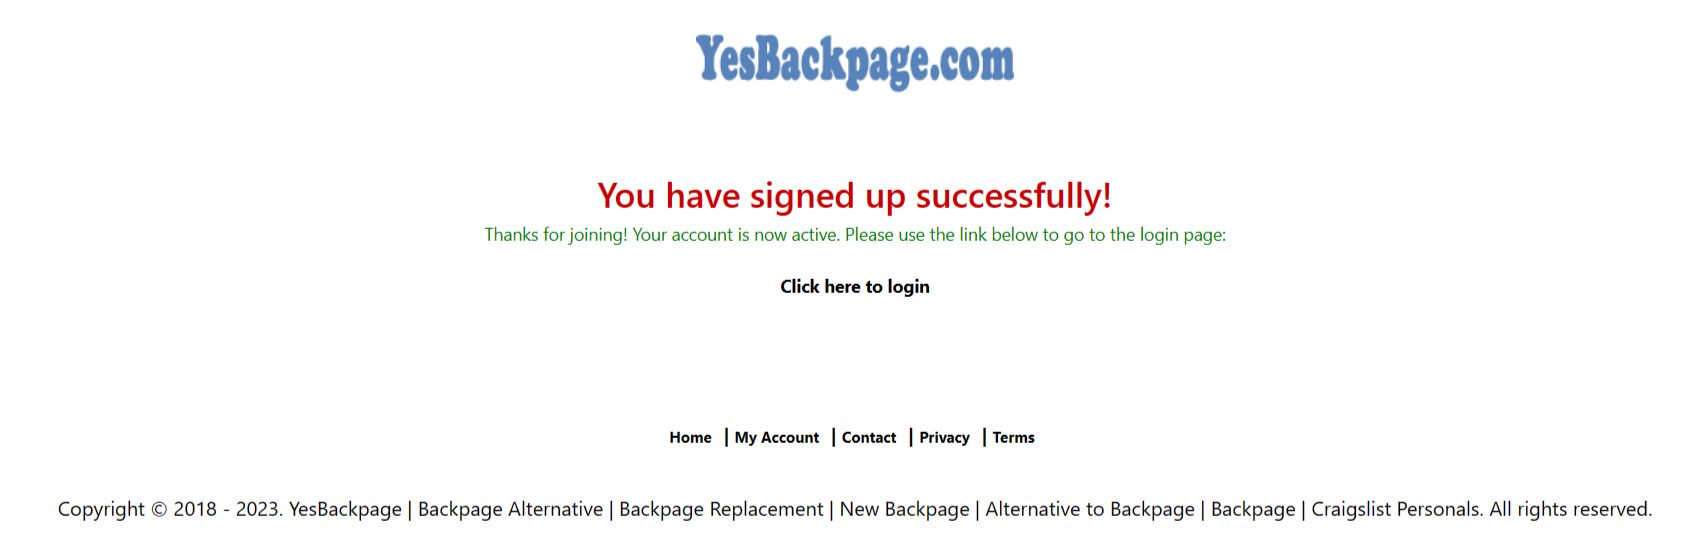 Yesbackpage signup activation